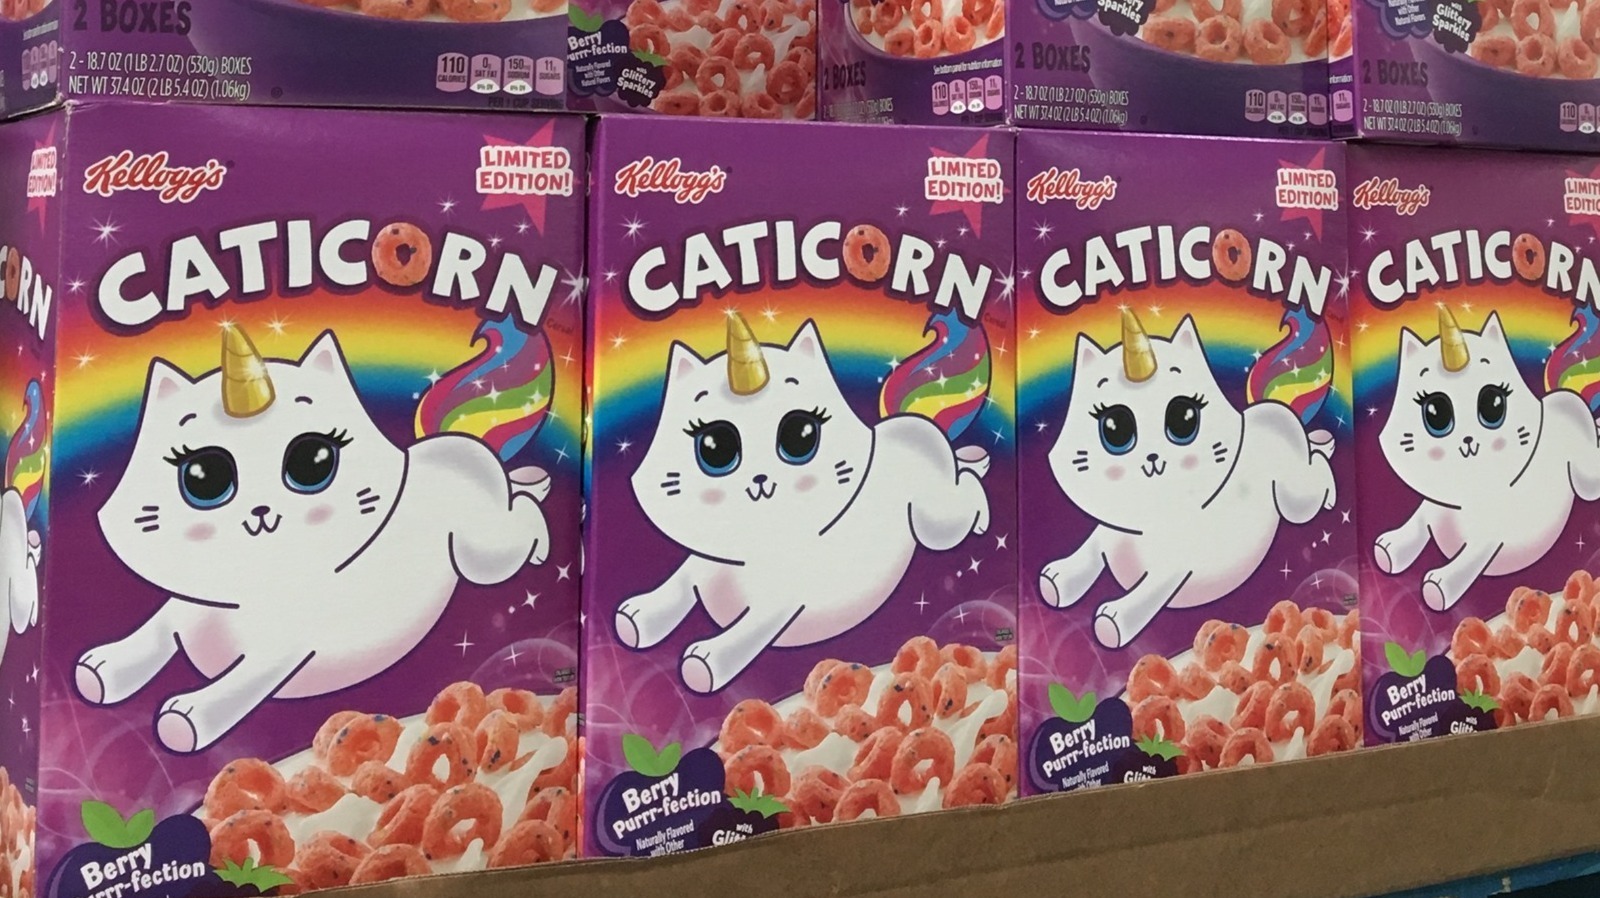 The 'Caticorn' Cereal You Forgot Sam's Club Used To Sell